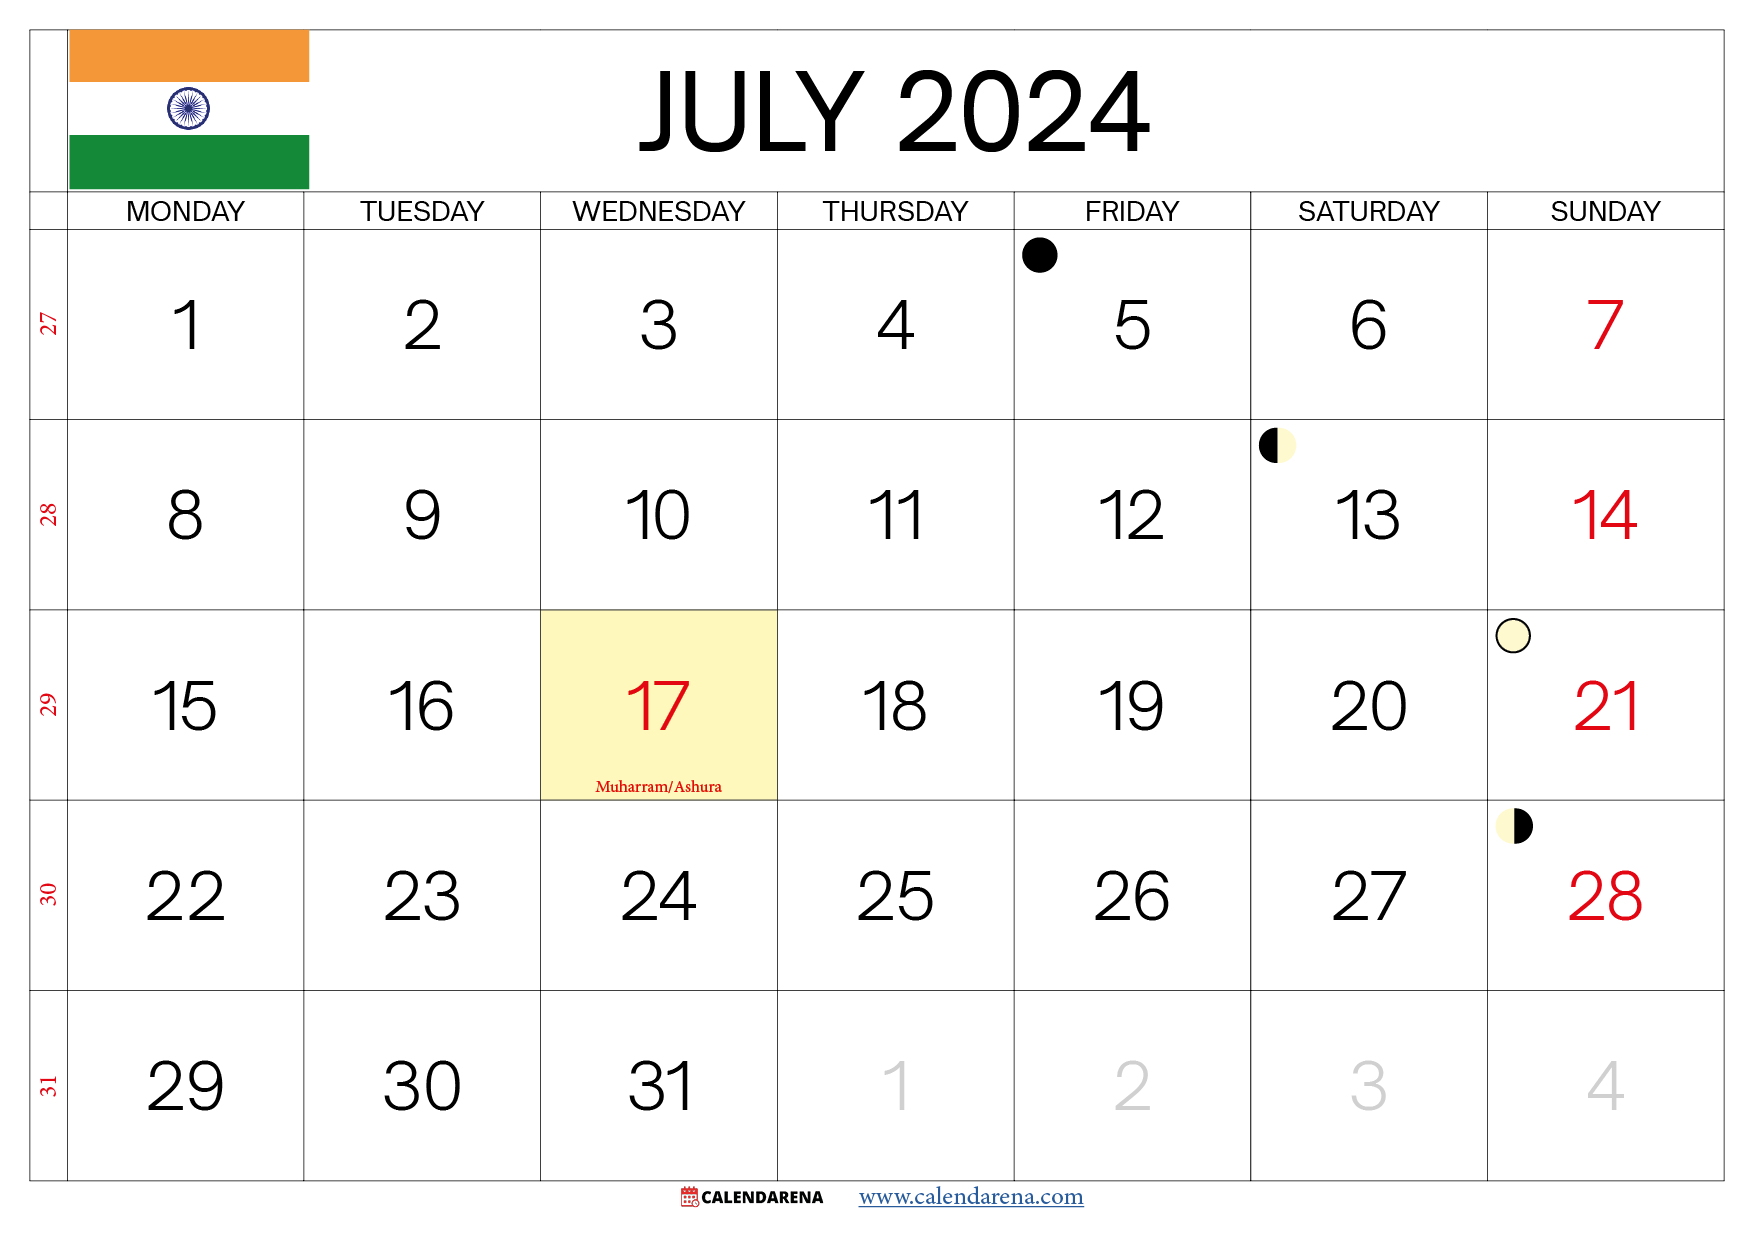 July 2024 Calendar India intended for July 2024 Calendar India